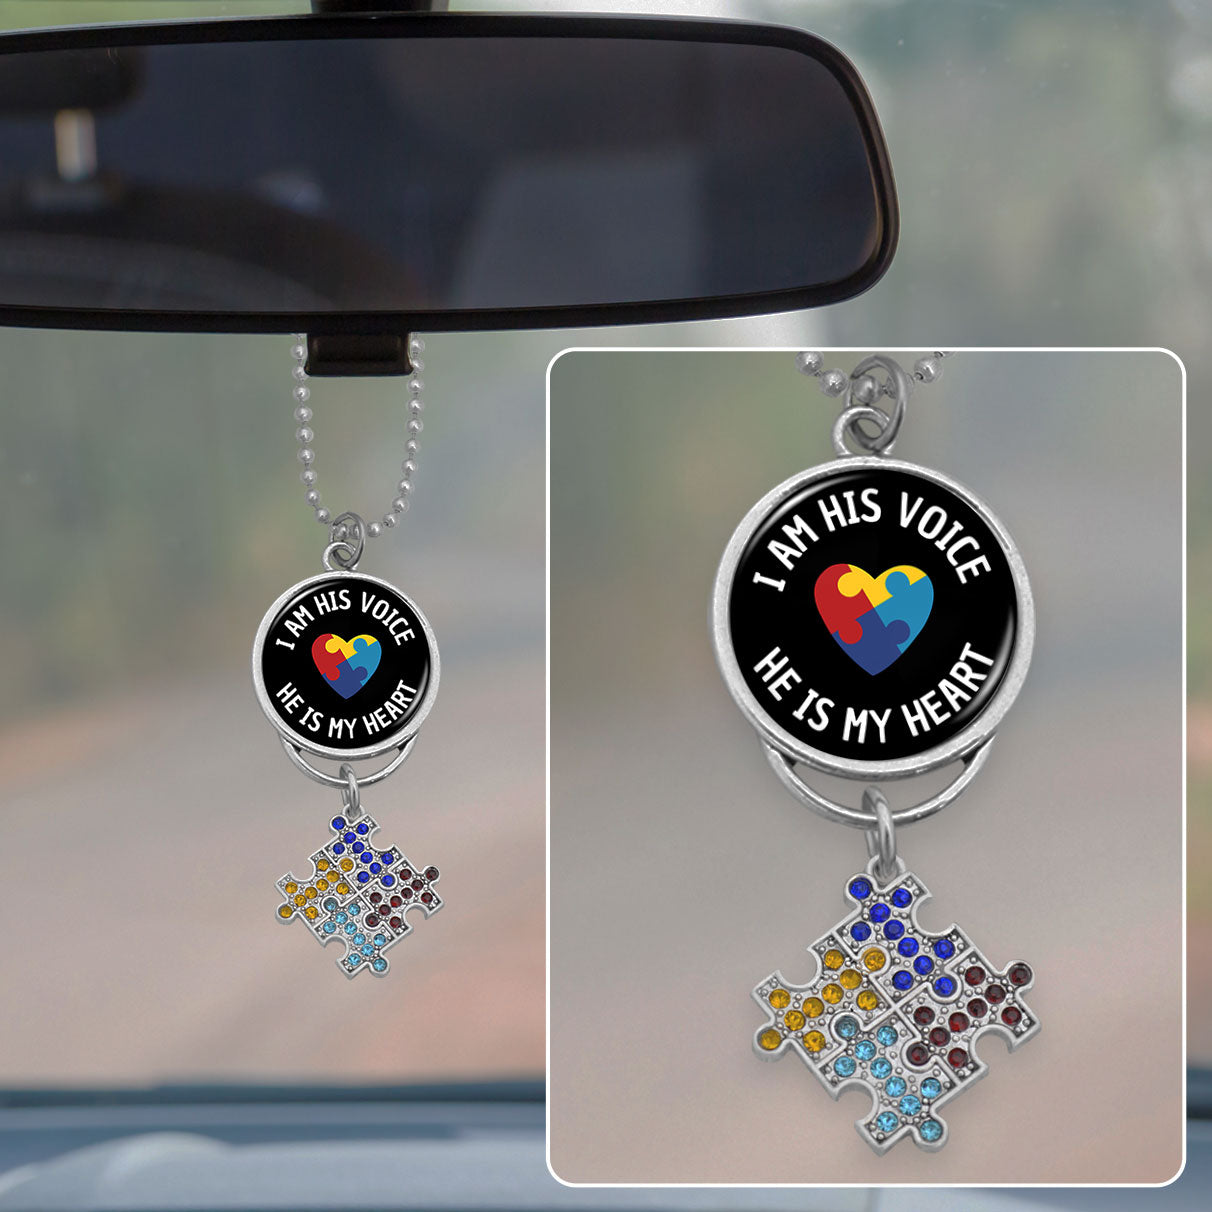 I Am His Voice Crystal Puzzle Pieces Autism Awareness Rearview Mirror Charm